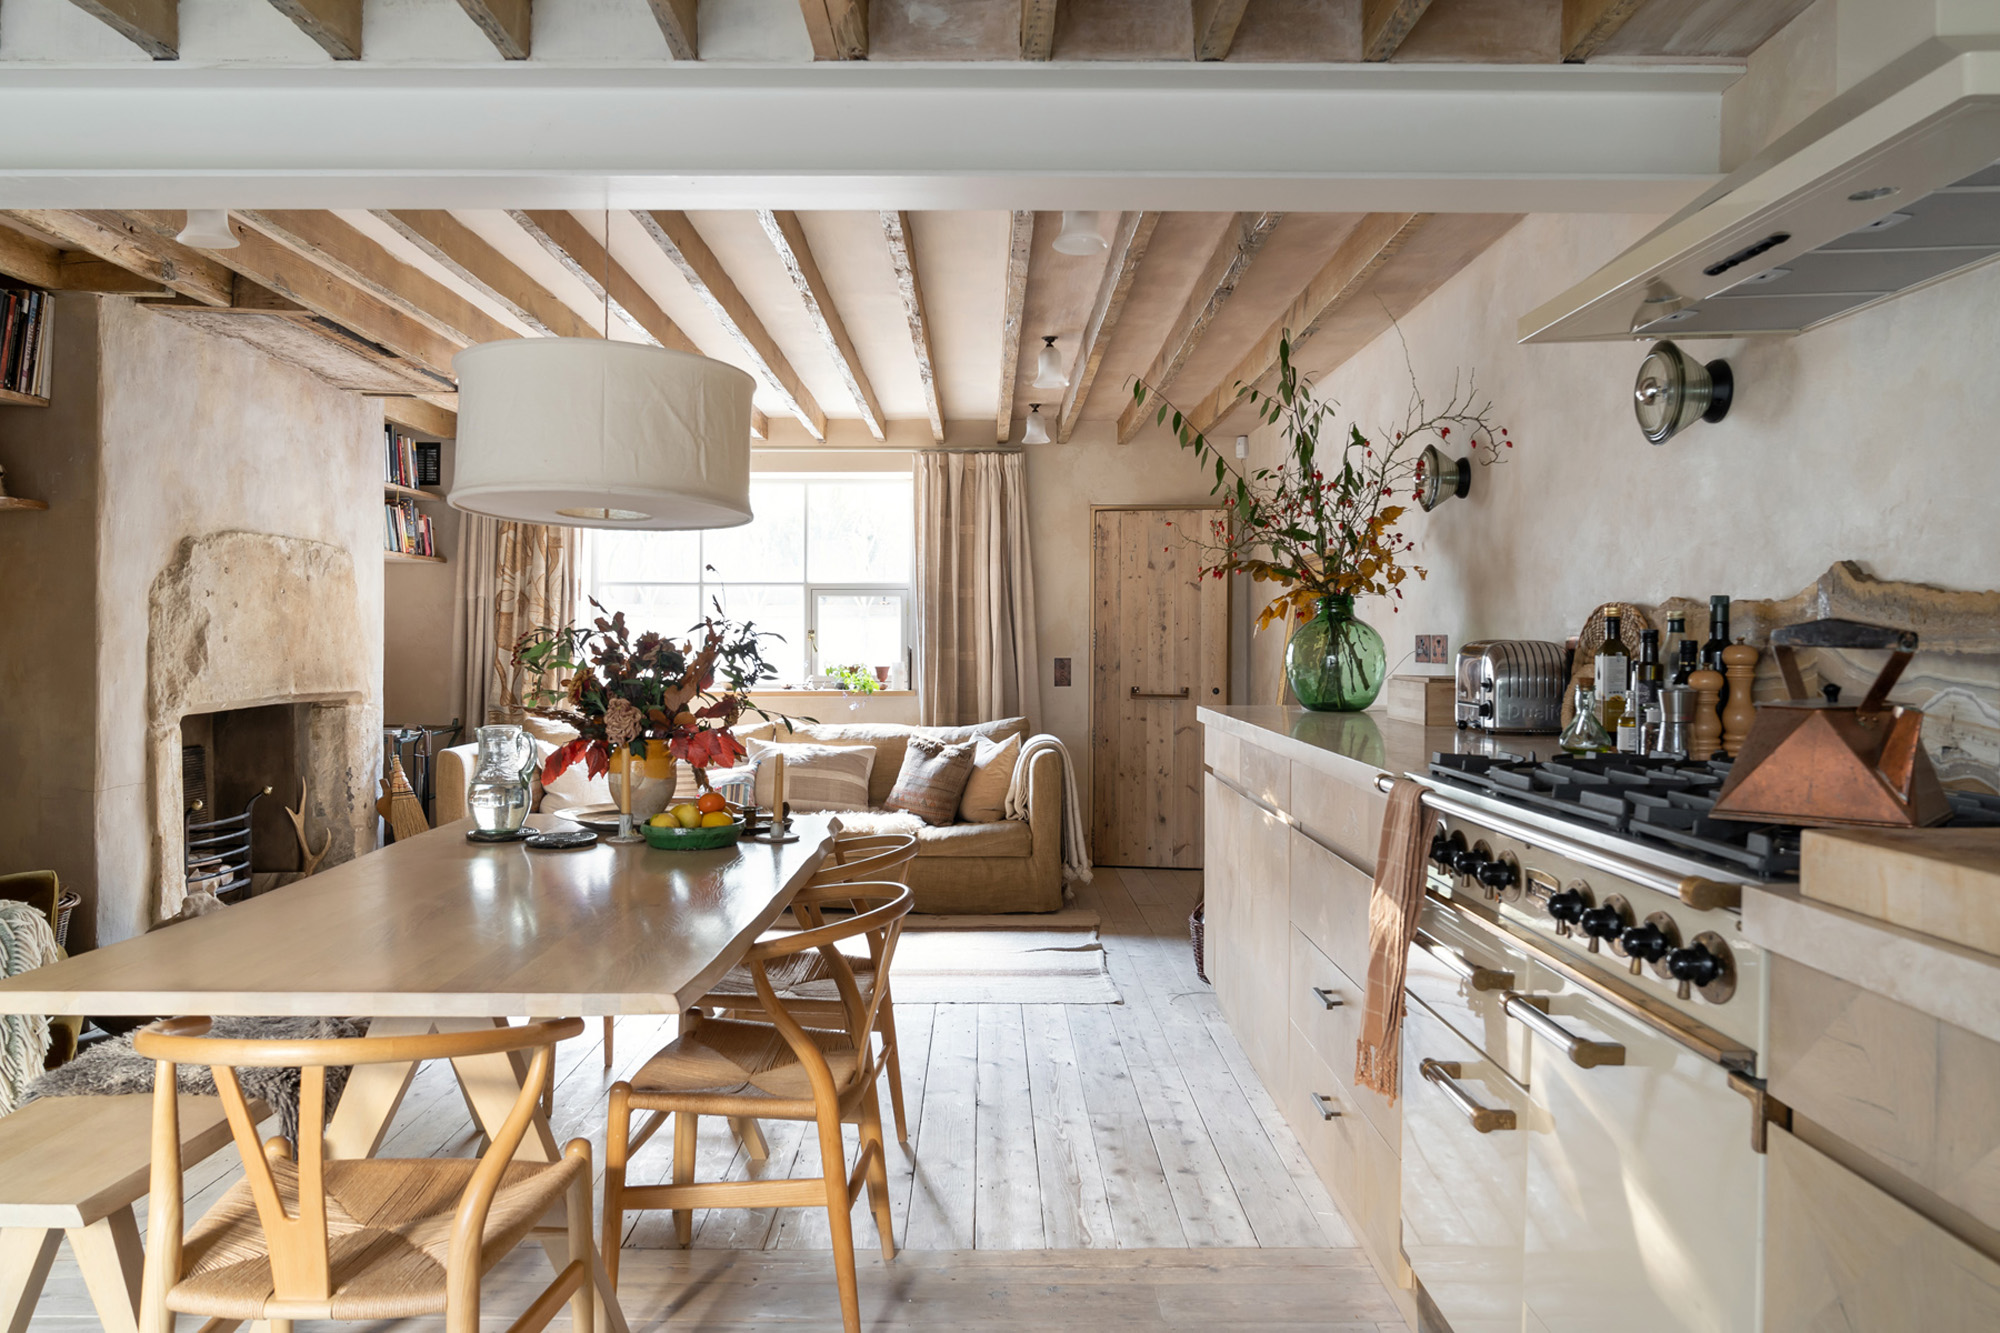 A rustic kitchen in a luxury Kensington townhouse